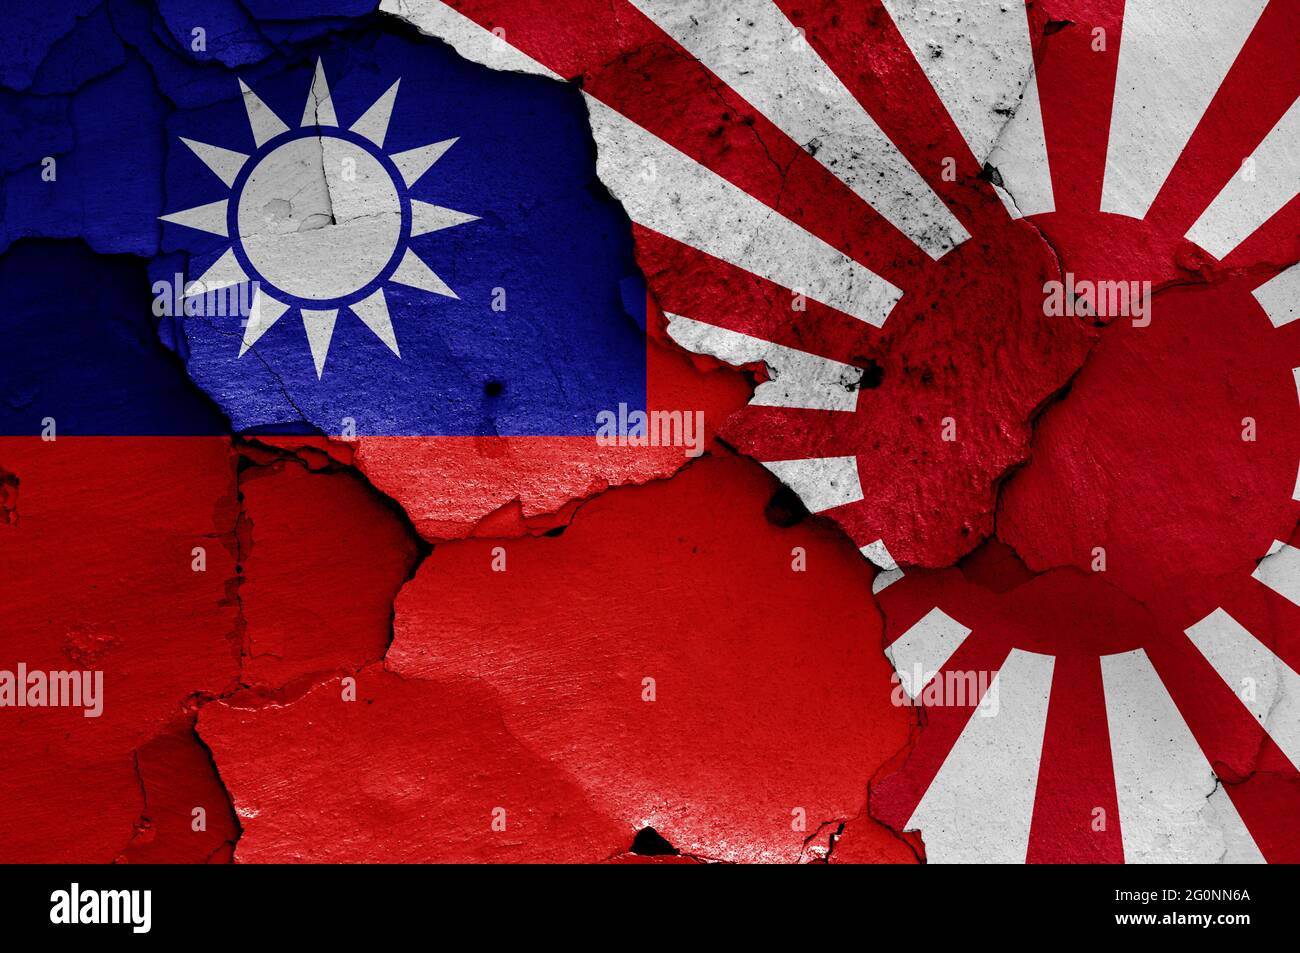 historical flags of Republic of China and Japanese warflag in WW2 Stock Photo